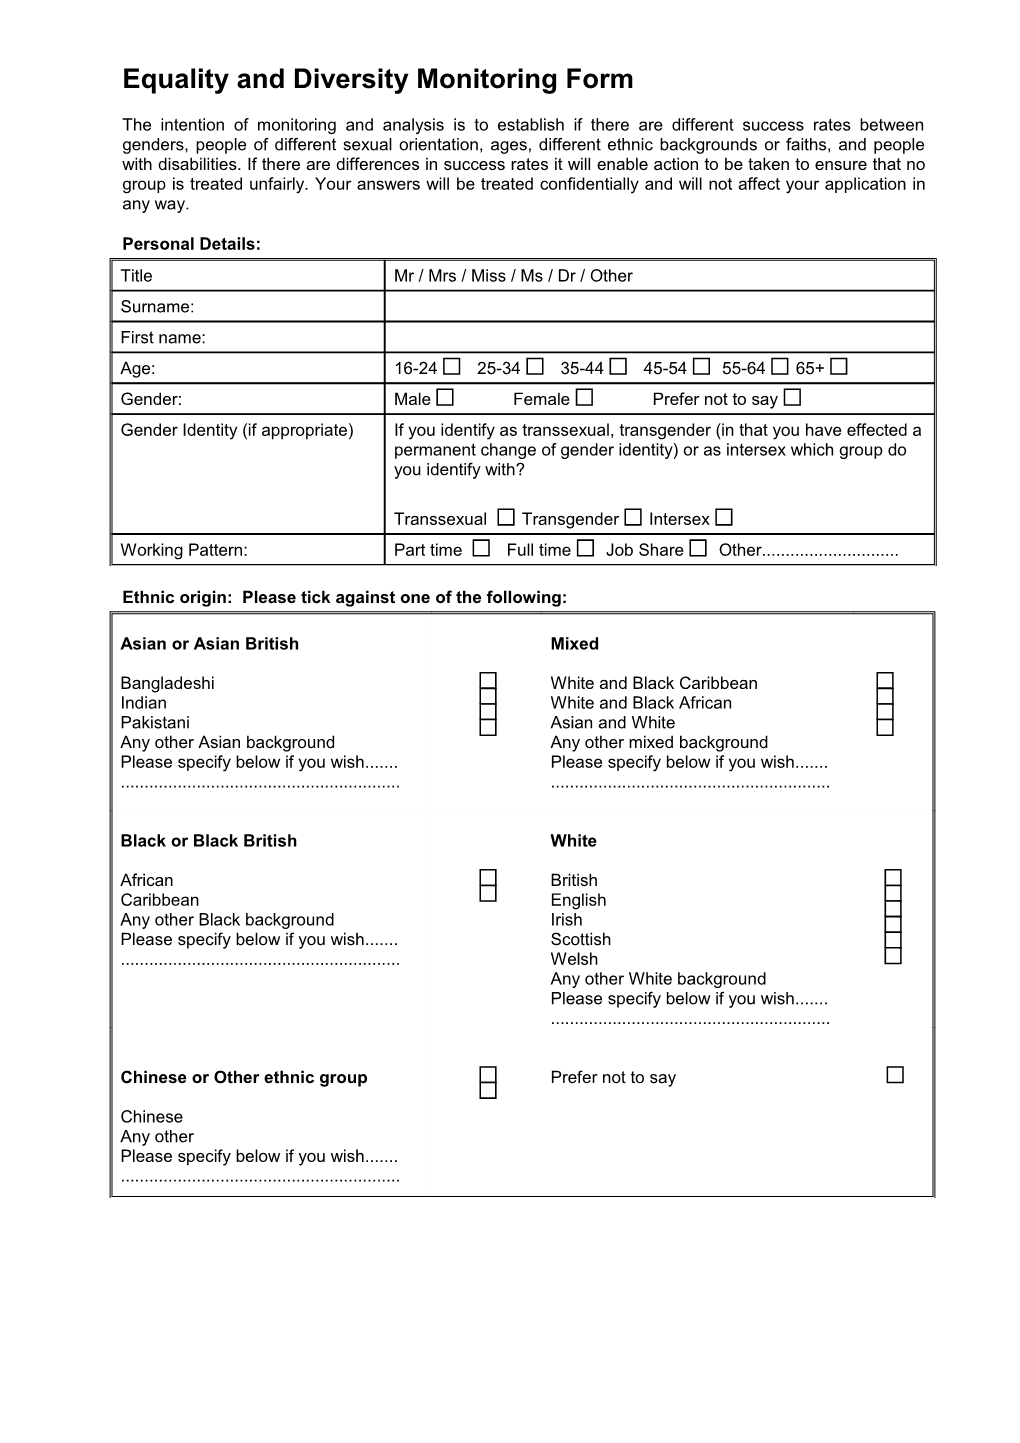 Equality and Diversity Monitoring Form